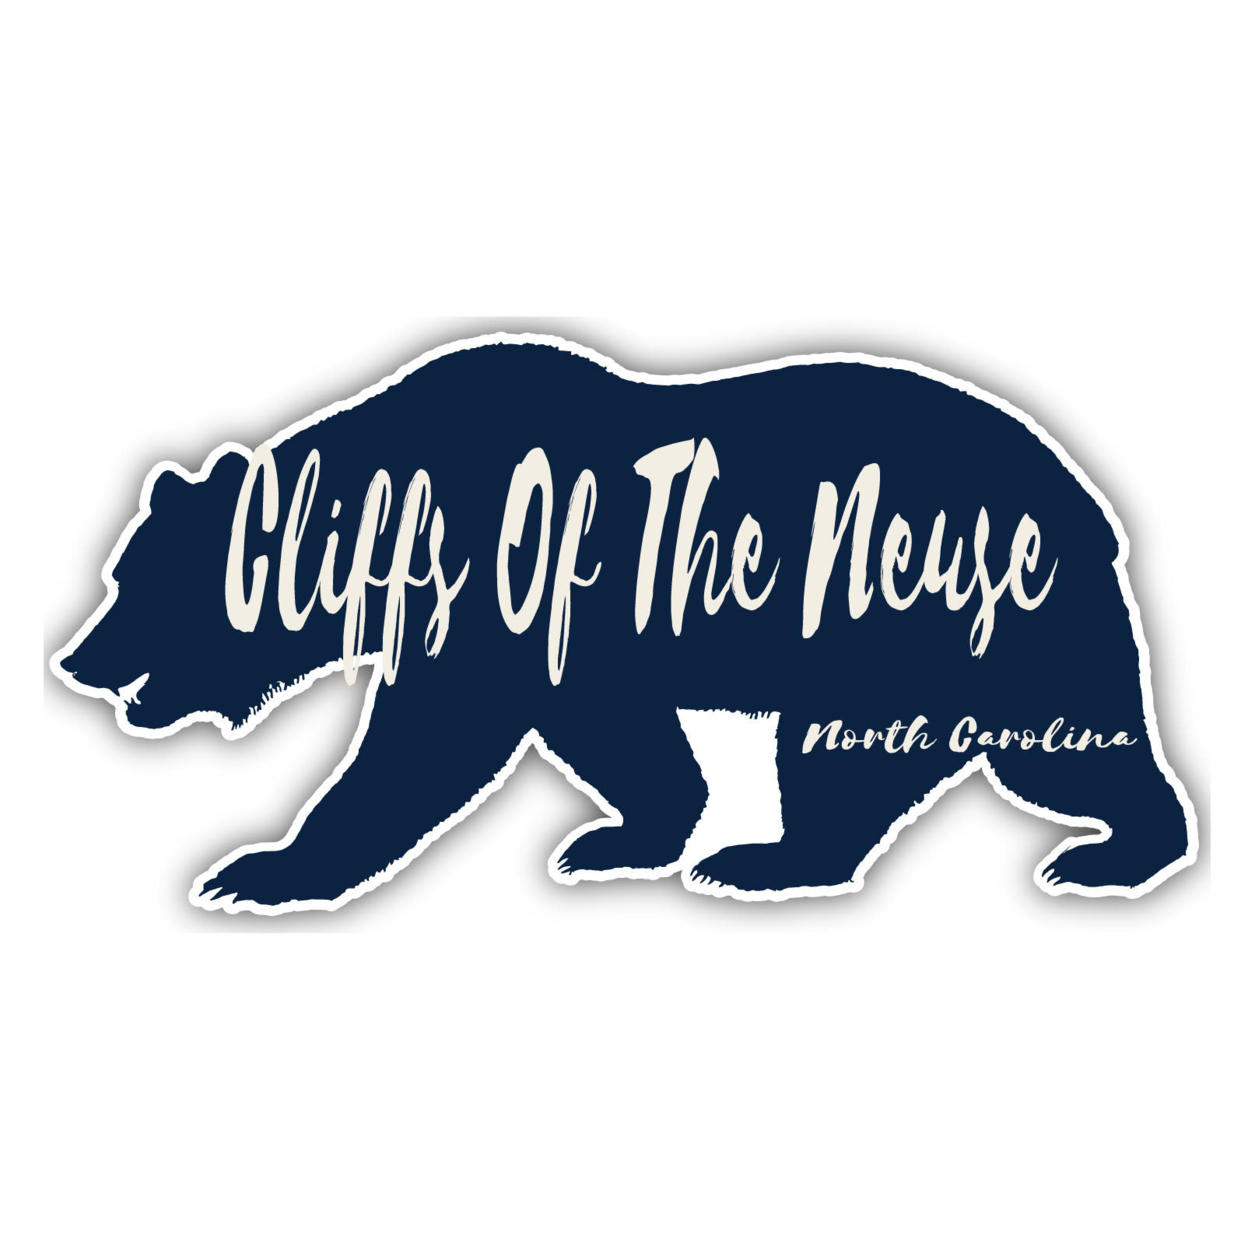 Cliffs Of The Neuse North Carolina Souvenir Decorative Stickers (Choose Theme And Size) - 4-Pack, 12-Inch, Bear